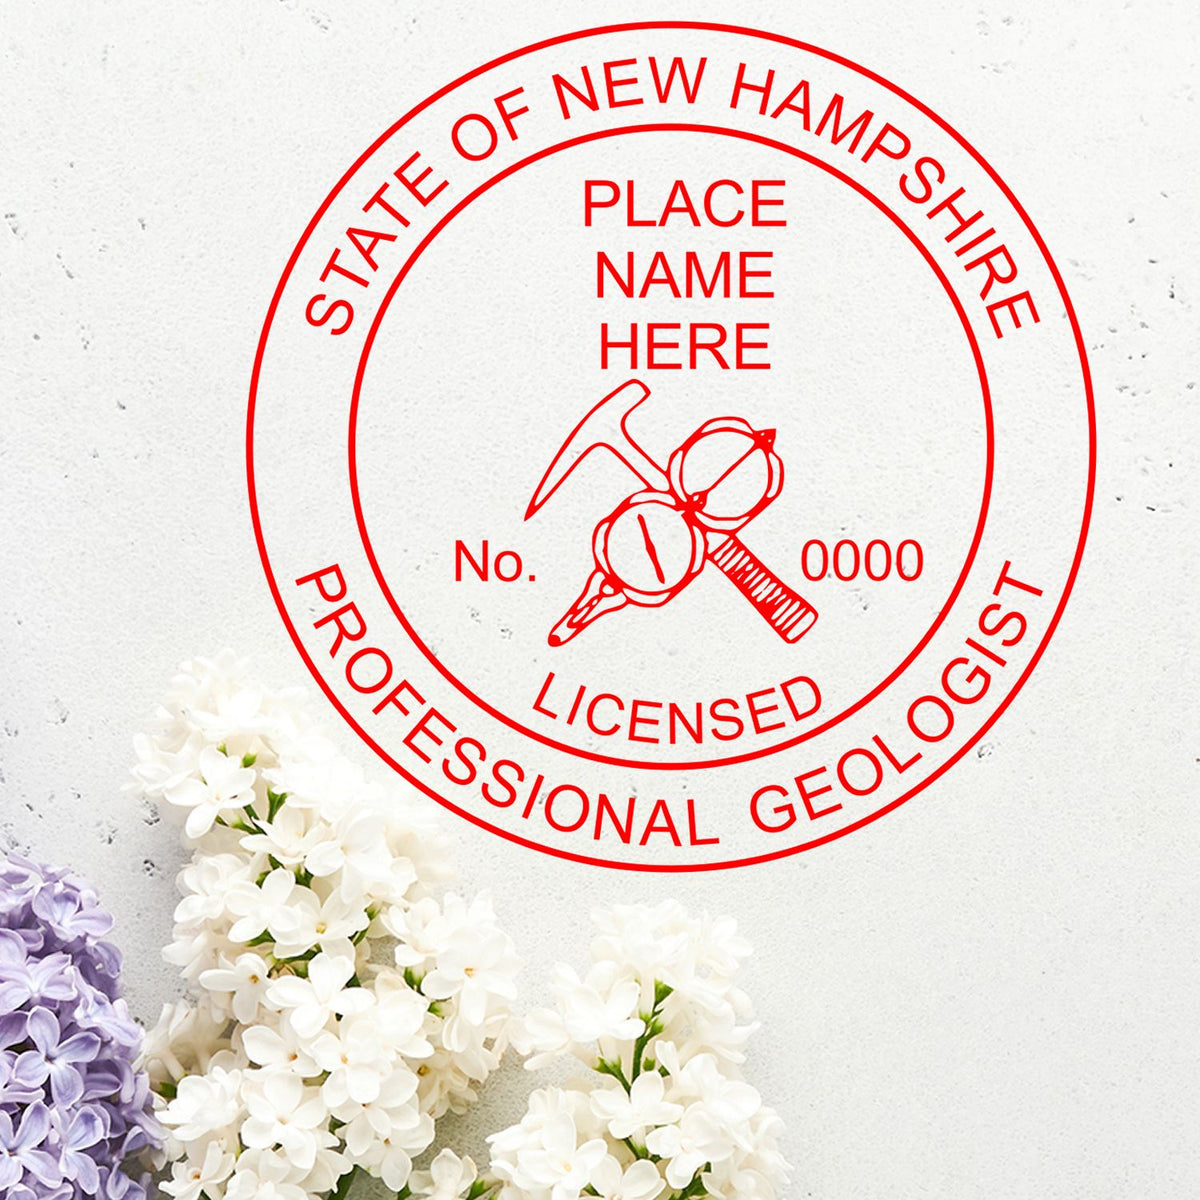 The Digital New Hampshire Geologist Stamp, Electronic Seal for New Hampshire Geologist stamp impression comes to life with a crisp, detailed image stamped on paper - showcasing true professional quality.